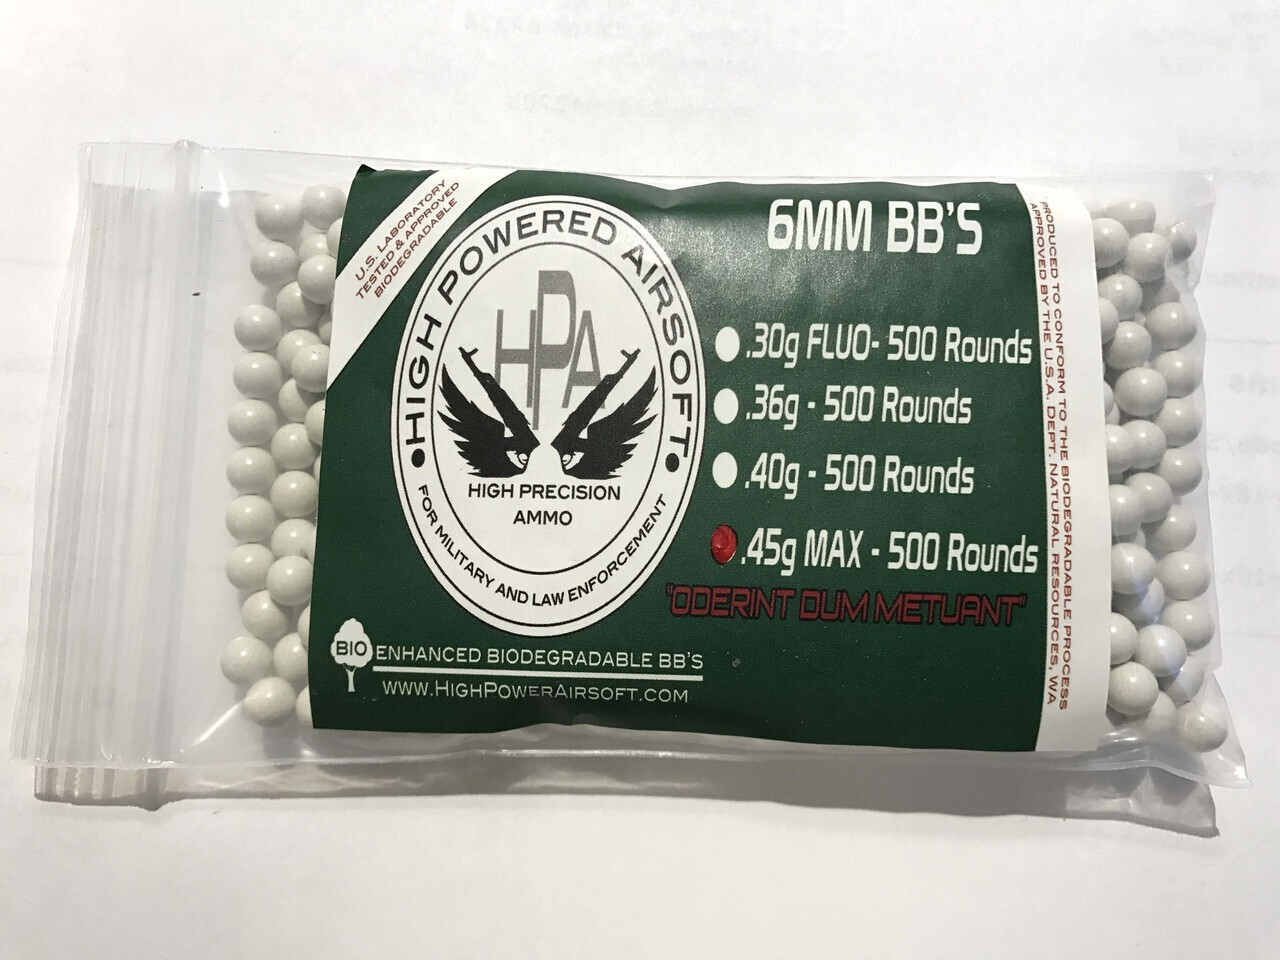 HPA .45g Biodegradable White BBs (approx. 500 bbs)